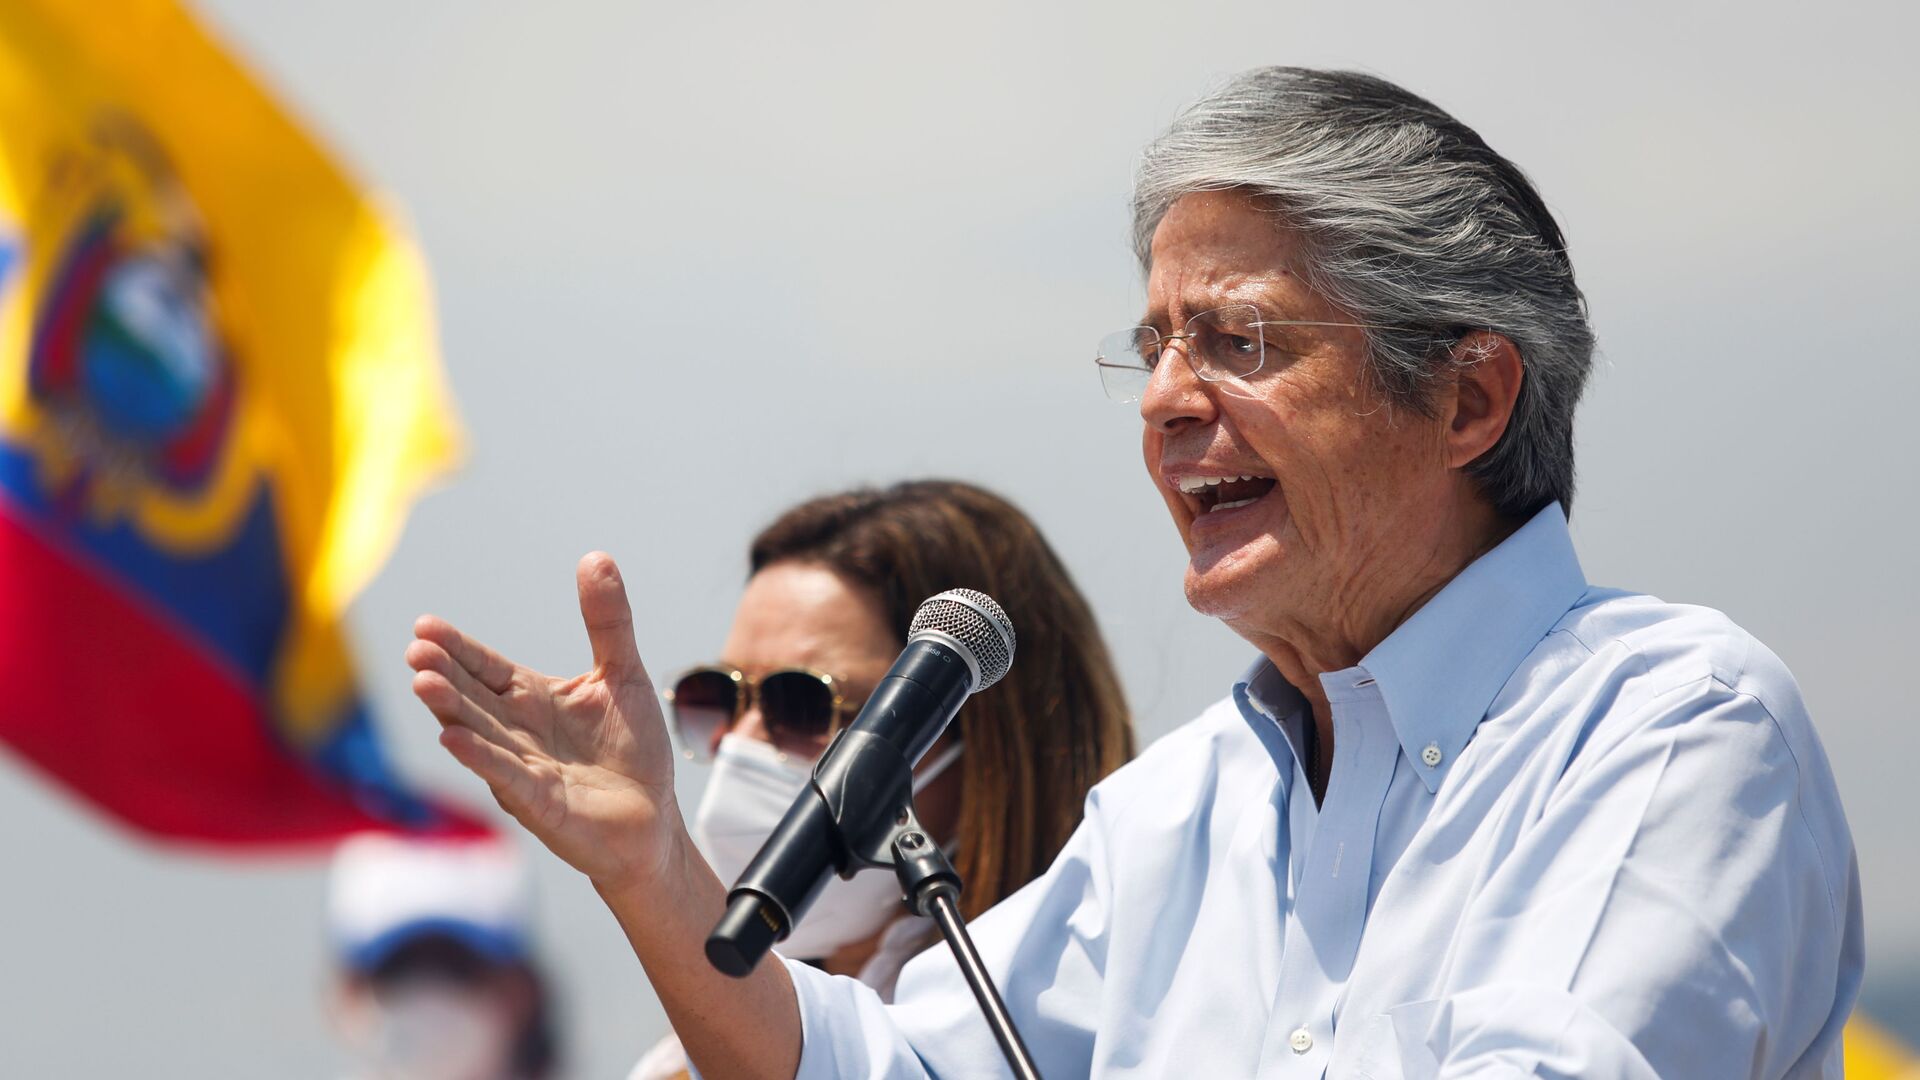 Ecuador's presidential candidate Guillermo Lasso gestures as he speaks during a closing campaign rally, in Guayaquil, Ecuador April 8, 2021. - Sputnik International, 1920, 01.09.2021